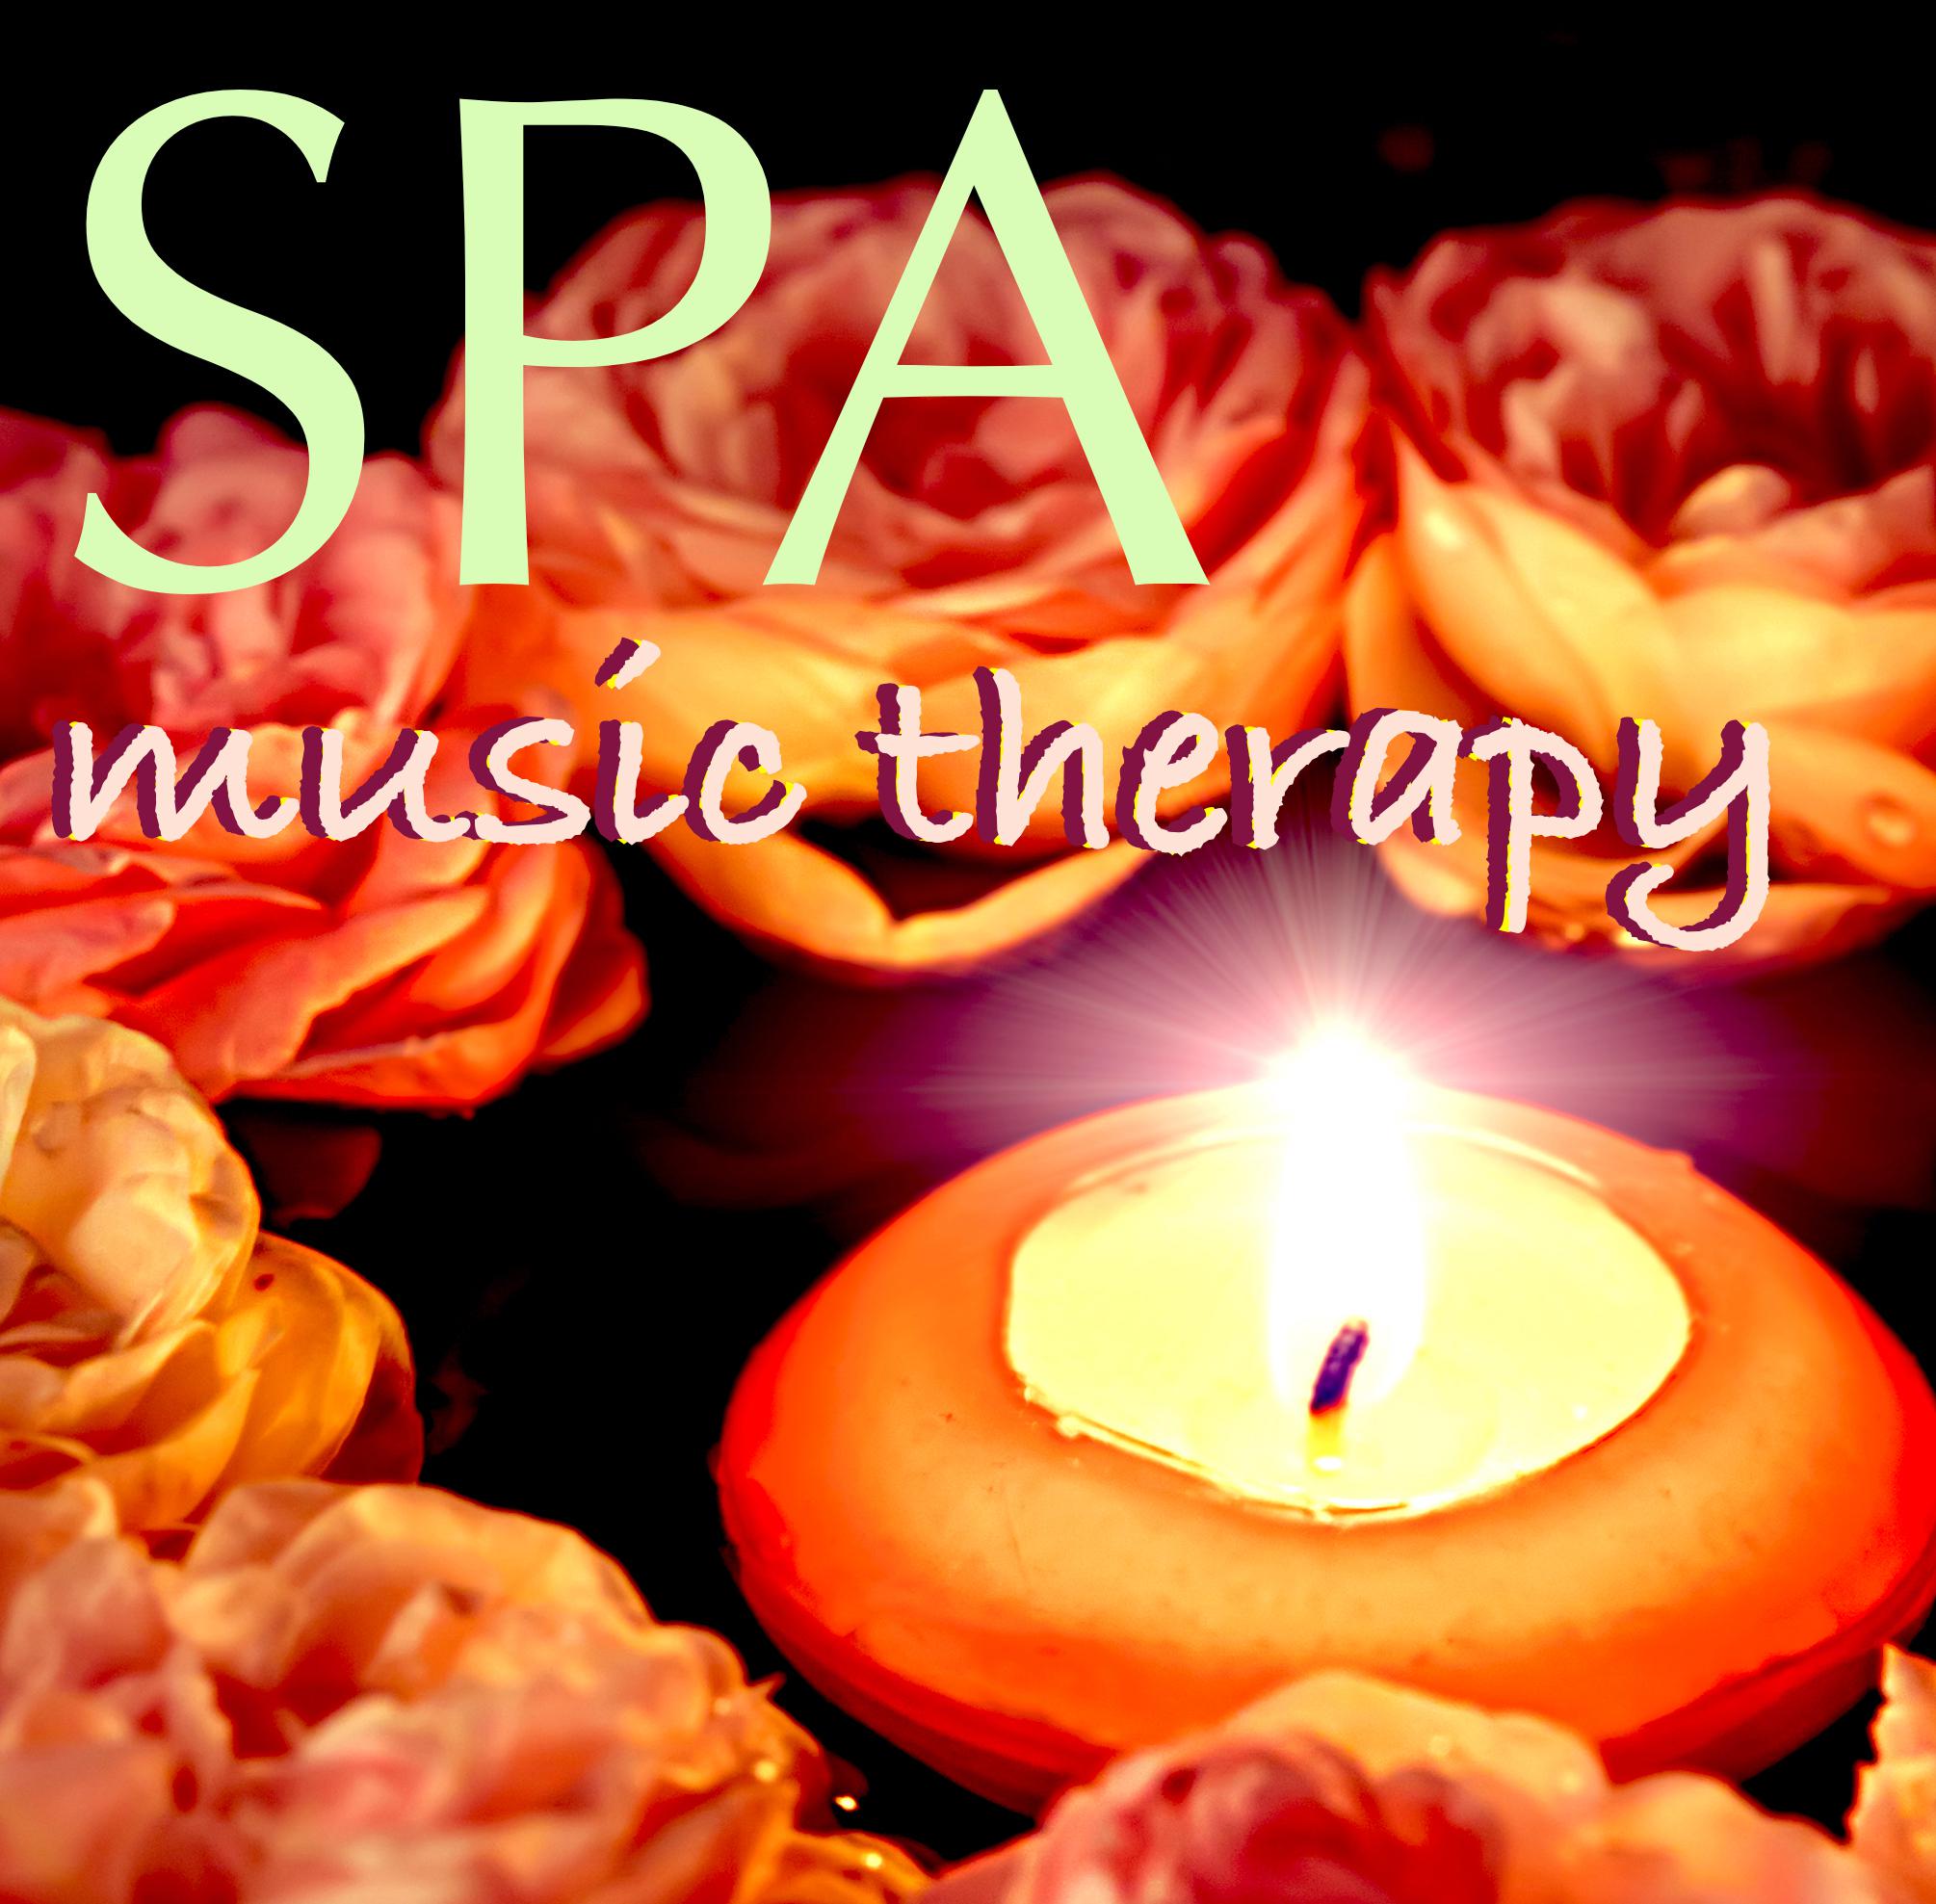 Spa: Music Therapy for Beauty Spa, Calming & Relaxing Atmosphere Songs, Chill Out Instrumental Music - Stress Relief, Deep Sleep, Meditation & Relaxation